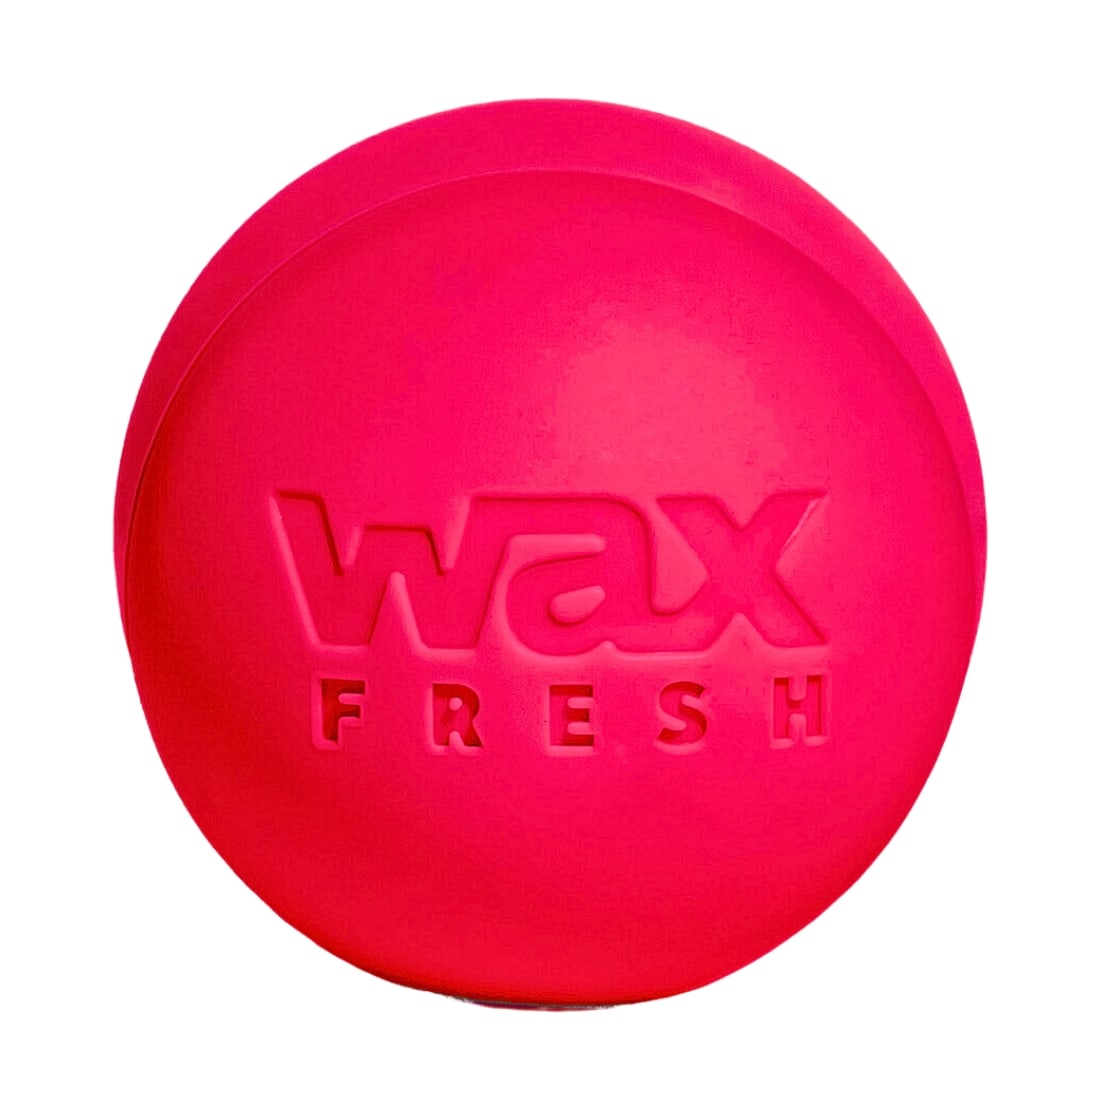 Wax Fresh Surfboard Wax Remover/Scraper - Pink - Surf Wax Remover by Wax Fresh One Size